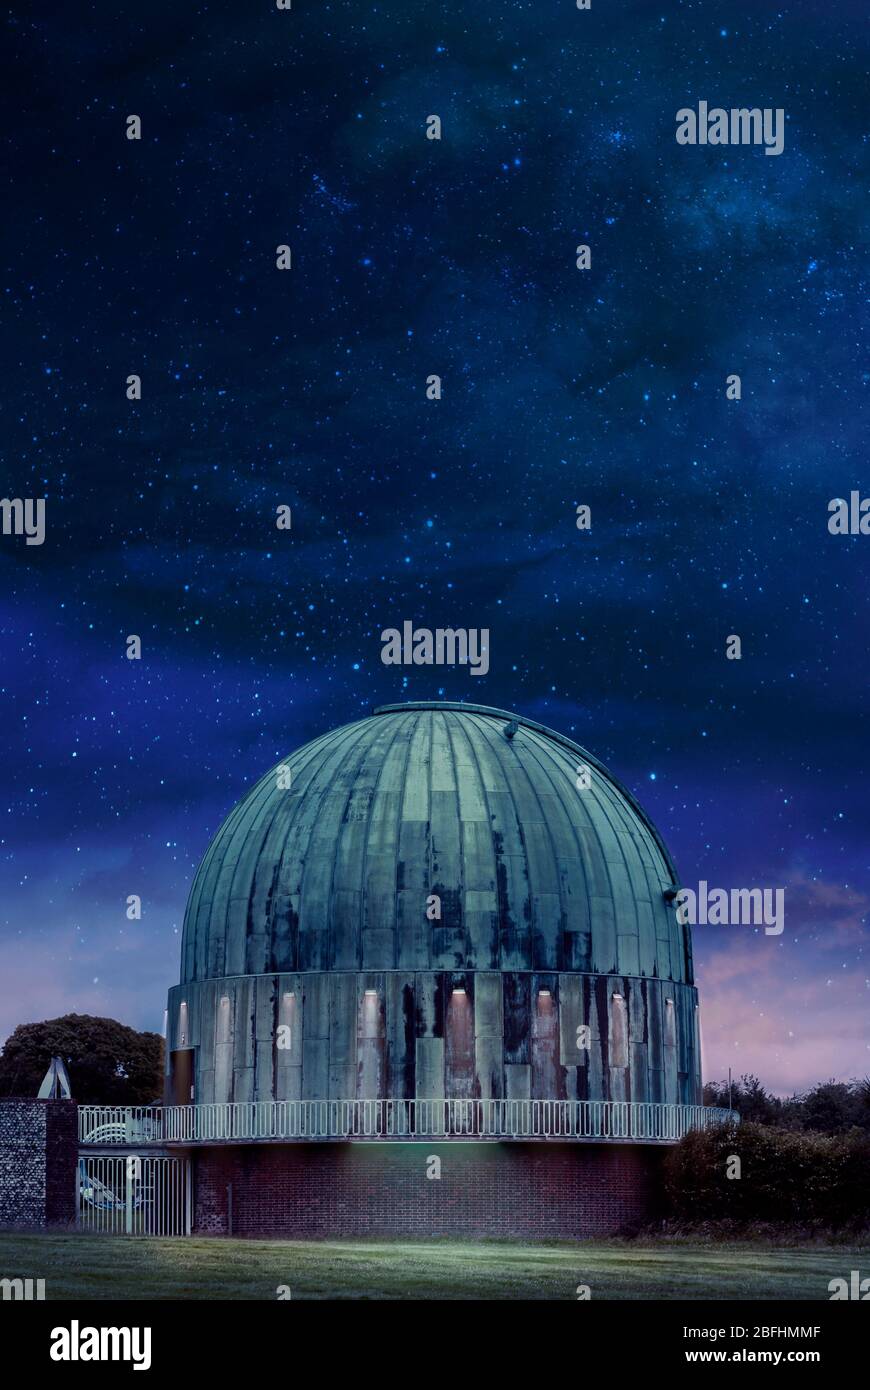 Herstmonceux Observatory Science Centre Dome at night, East Sussex, United kingdom Stock Photo